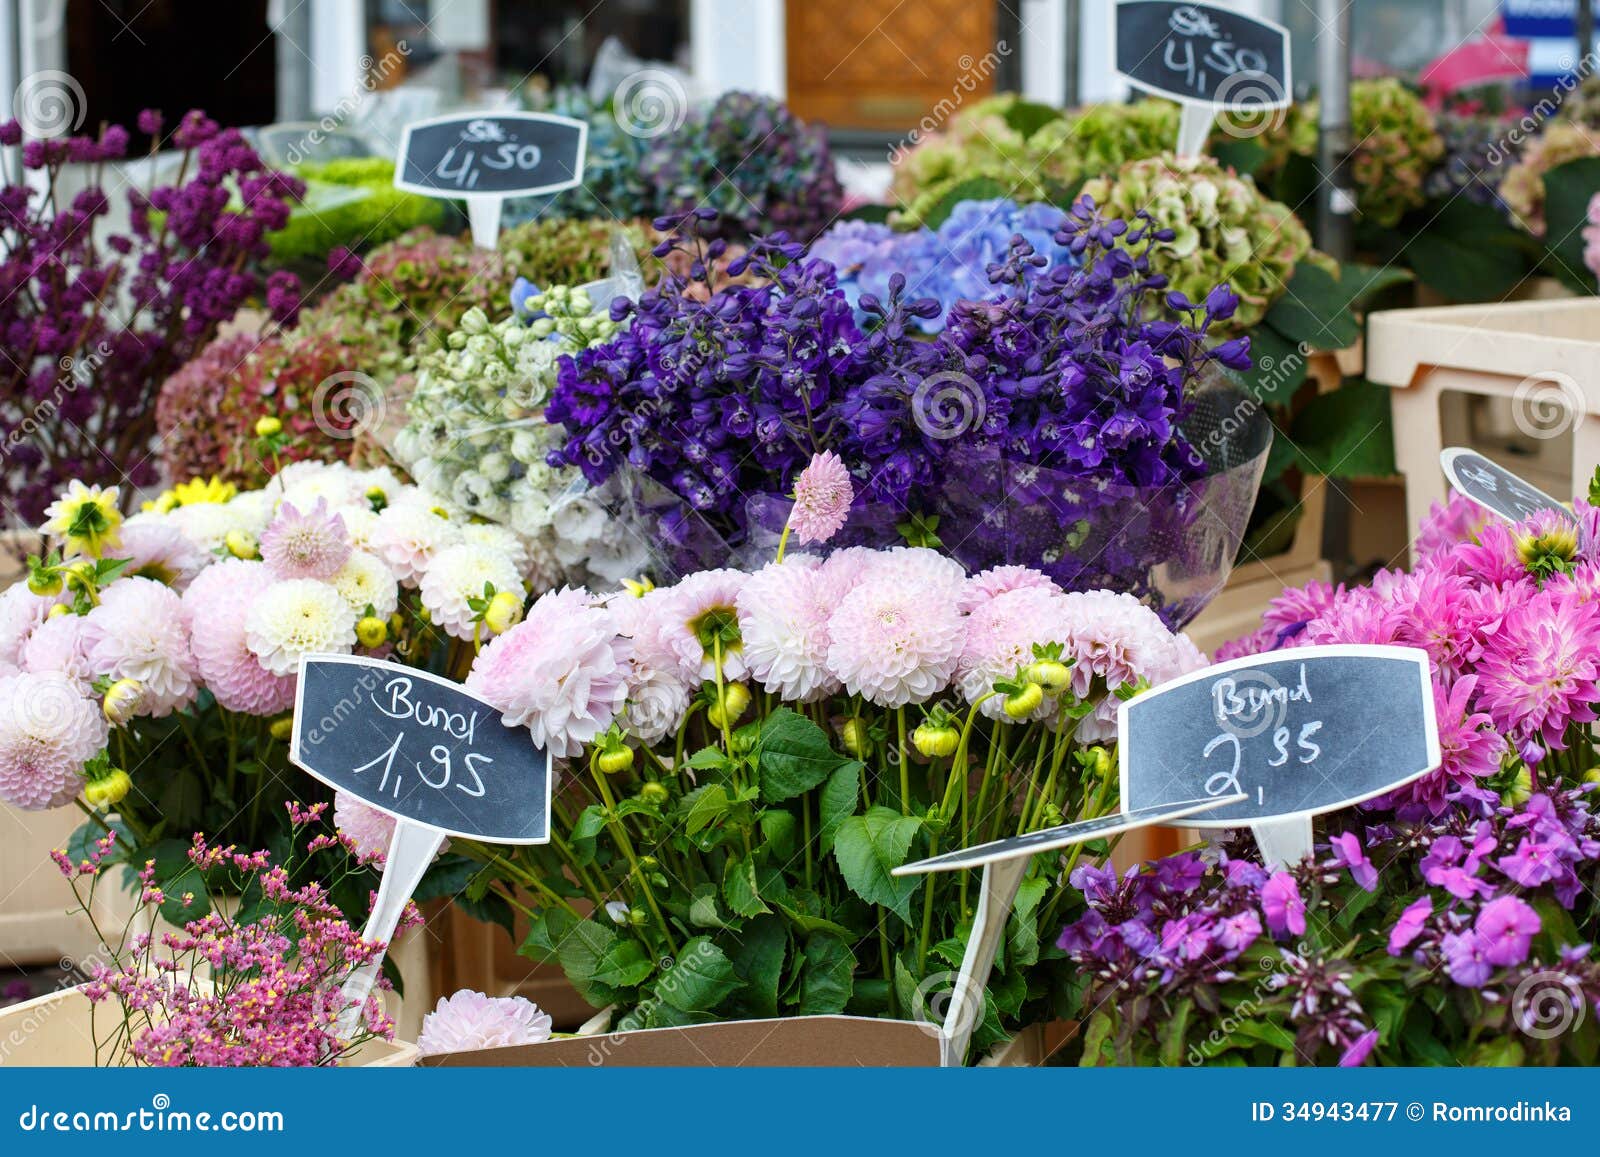 Flowers for sale at a German flower market.